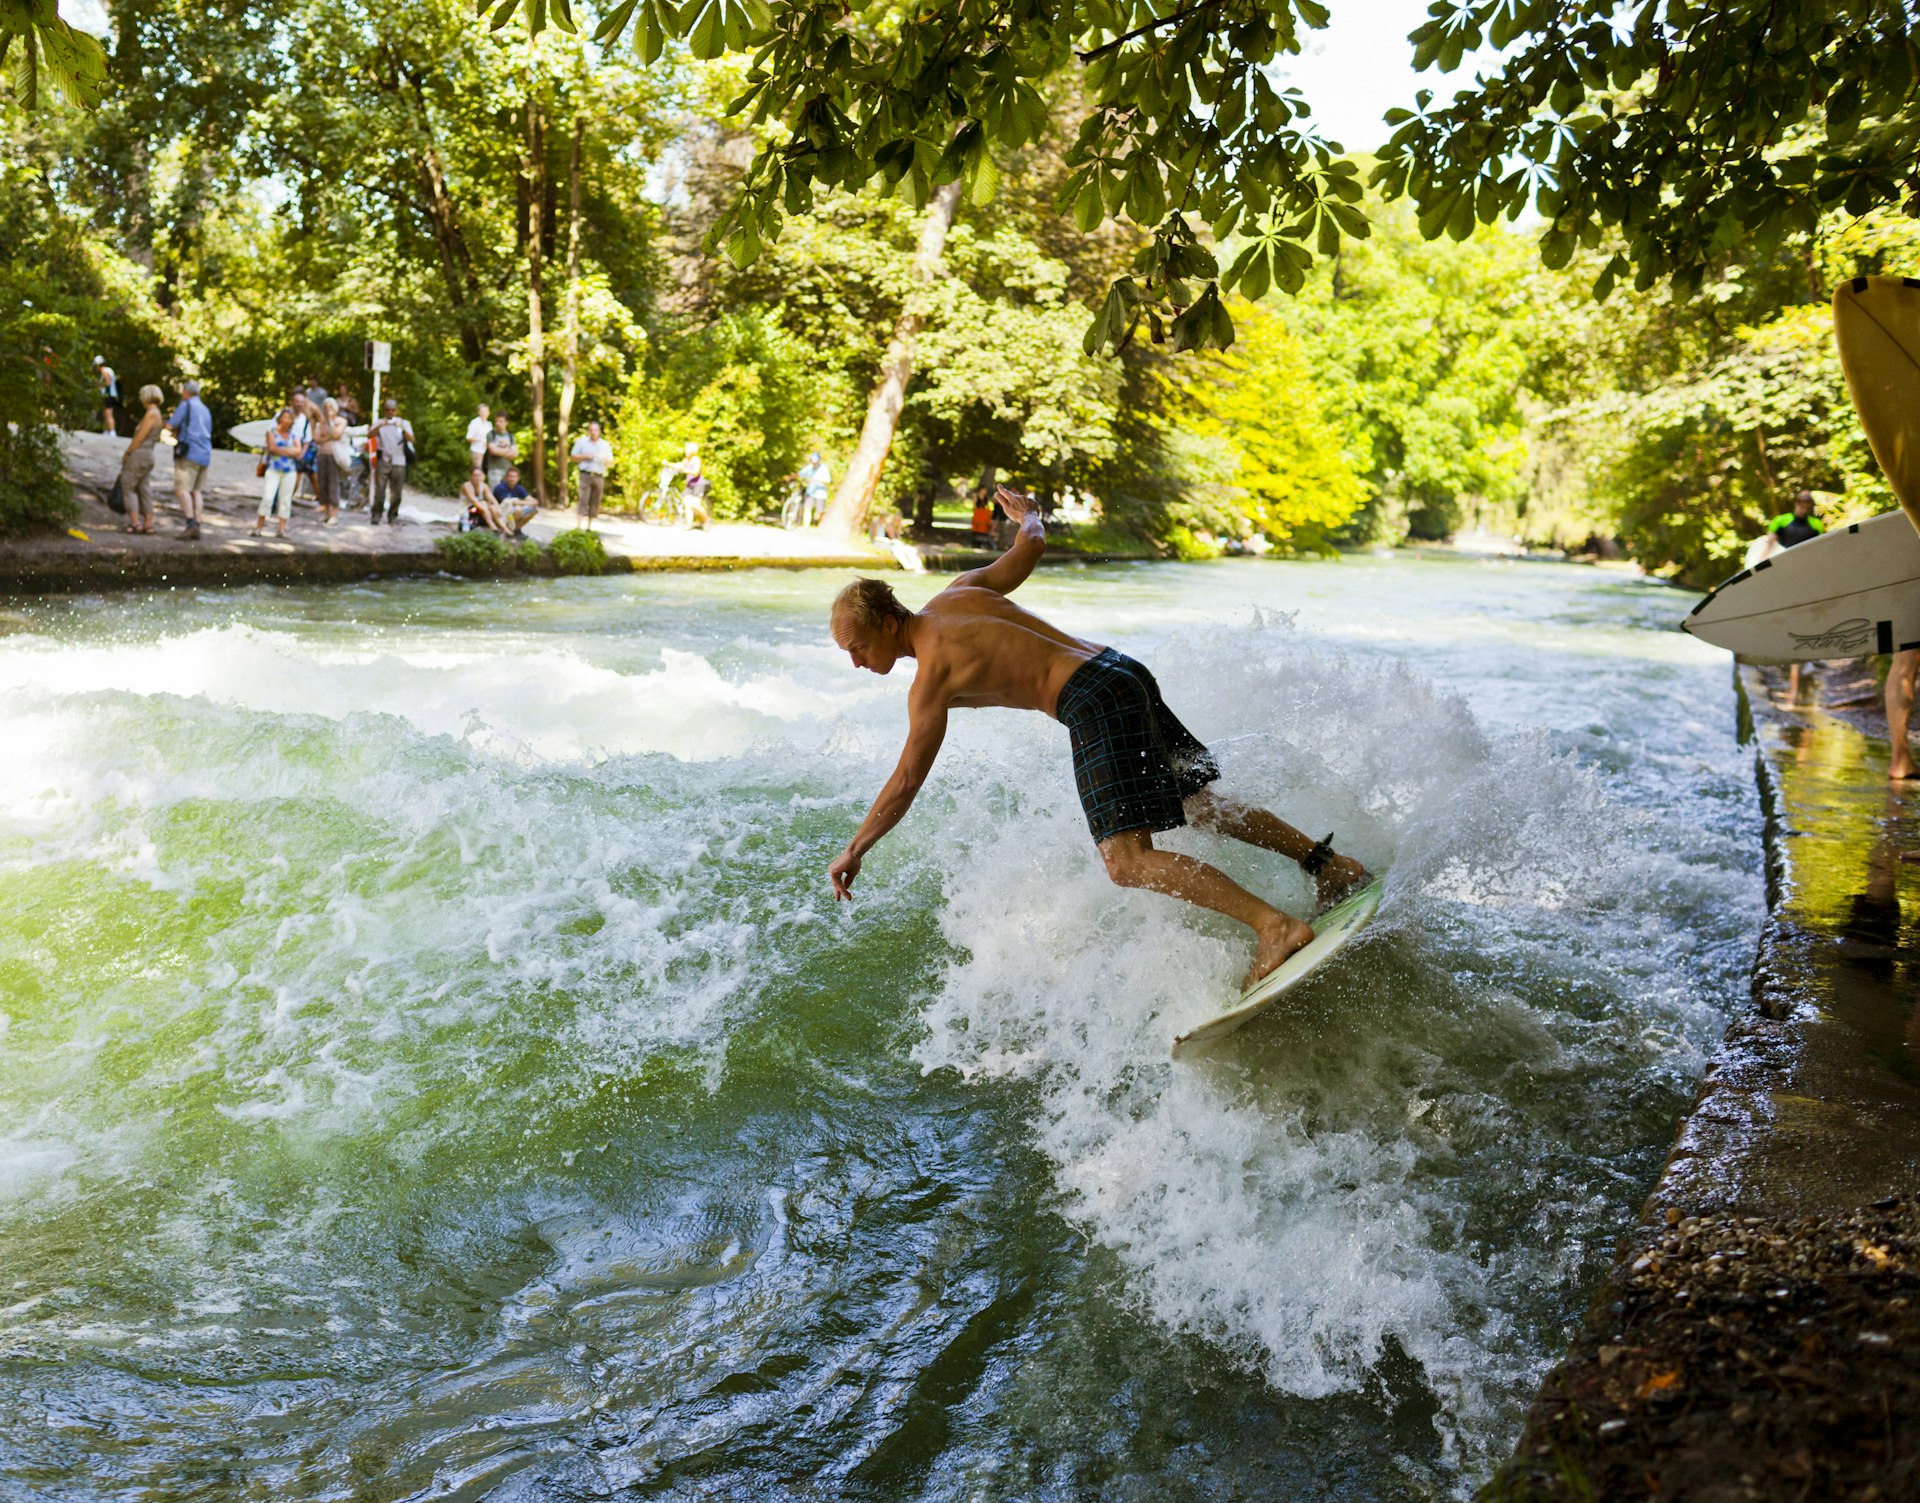  Man surfing with other people watching at the Eisbach river in Munich Germany. 